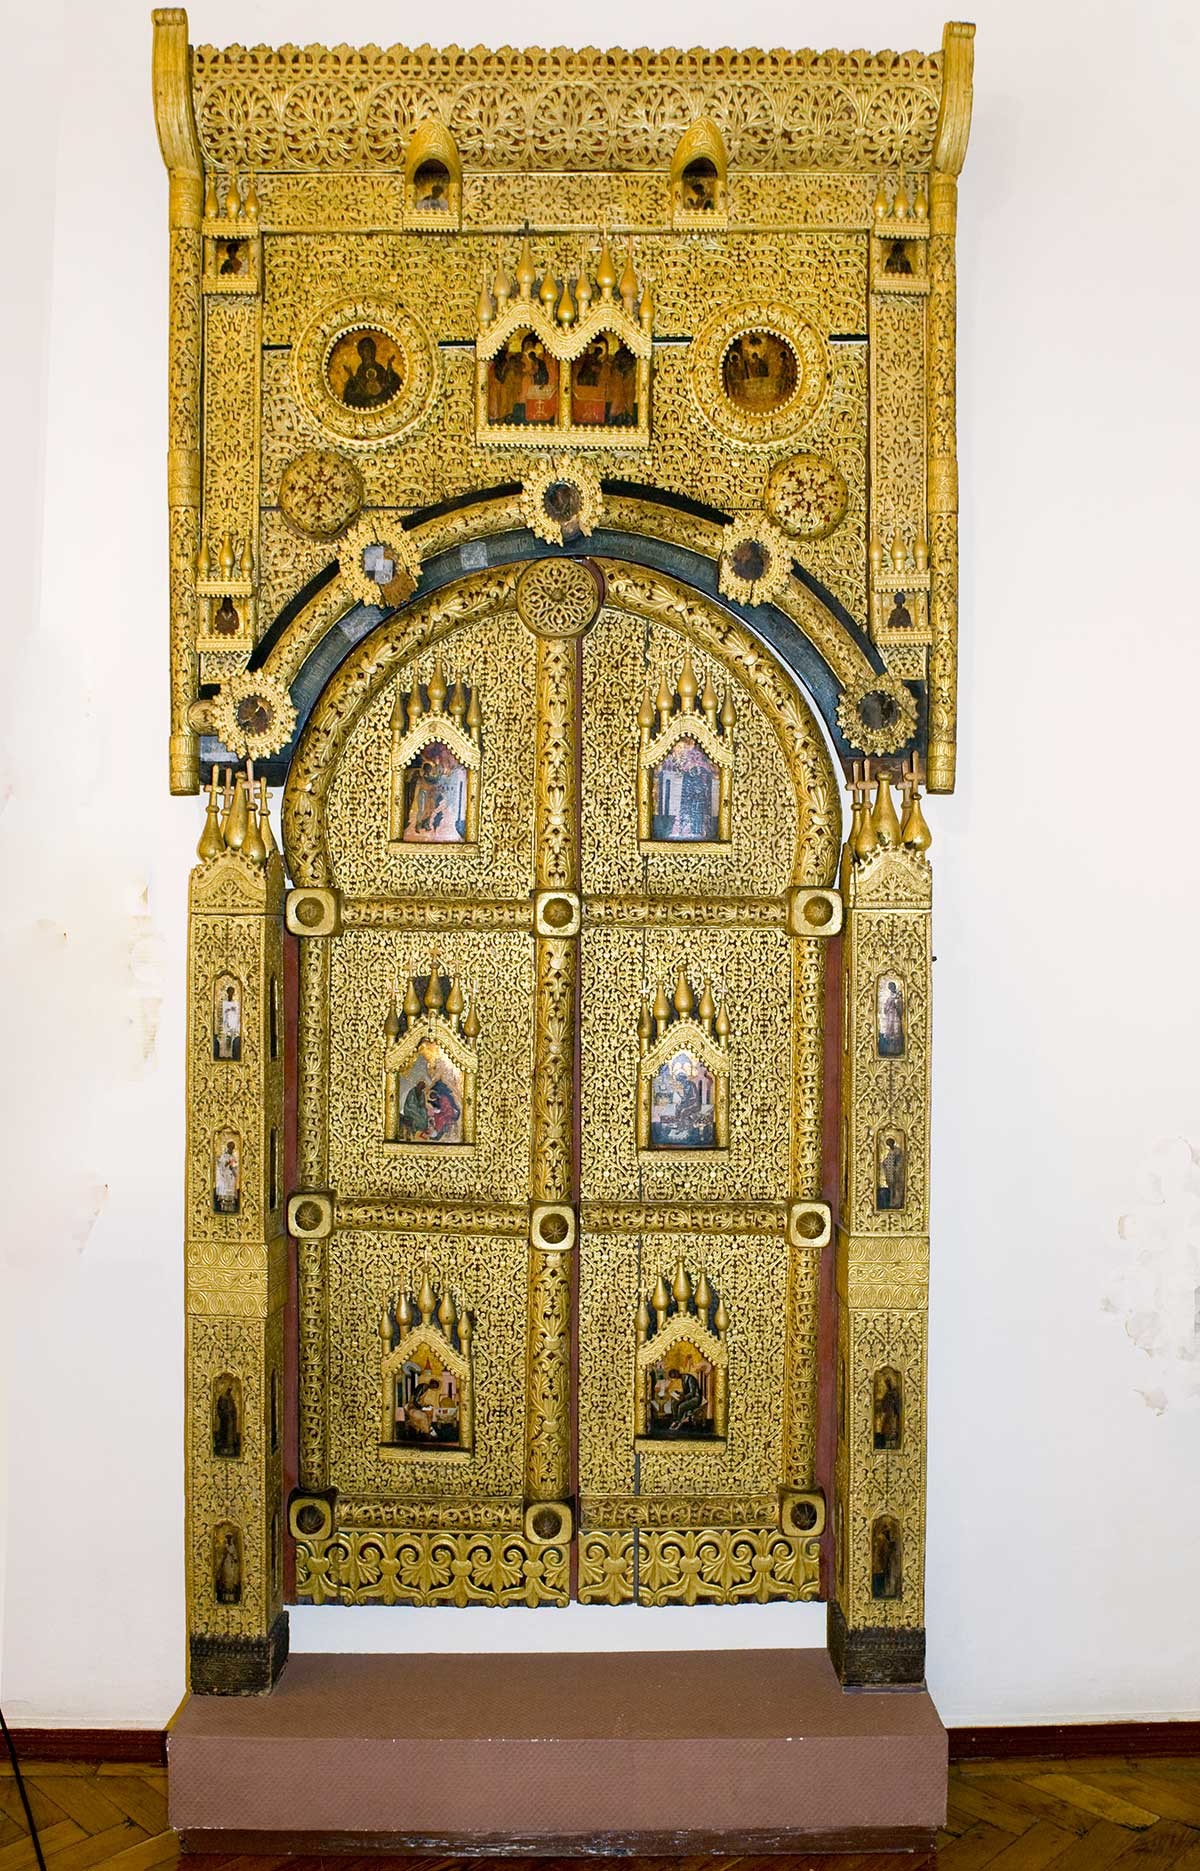 Rostov Kremlin Museum. Original mid-16th century icon screen carved Royal Gate placed in Church of St. John in late 17th-century. July 5, 2019